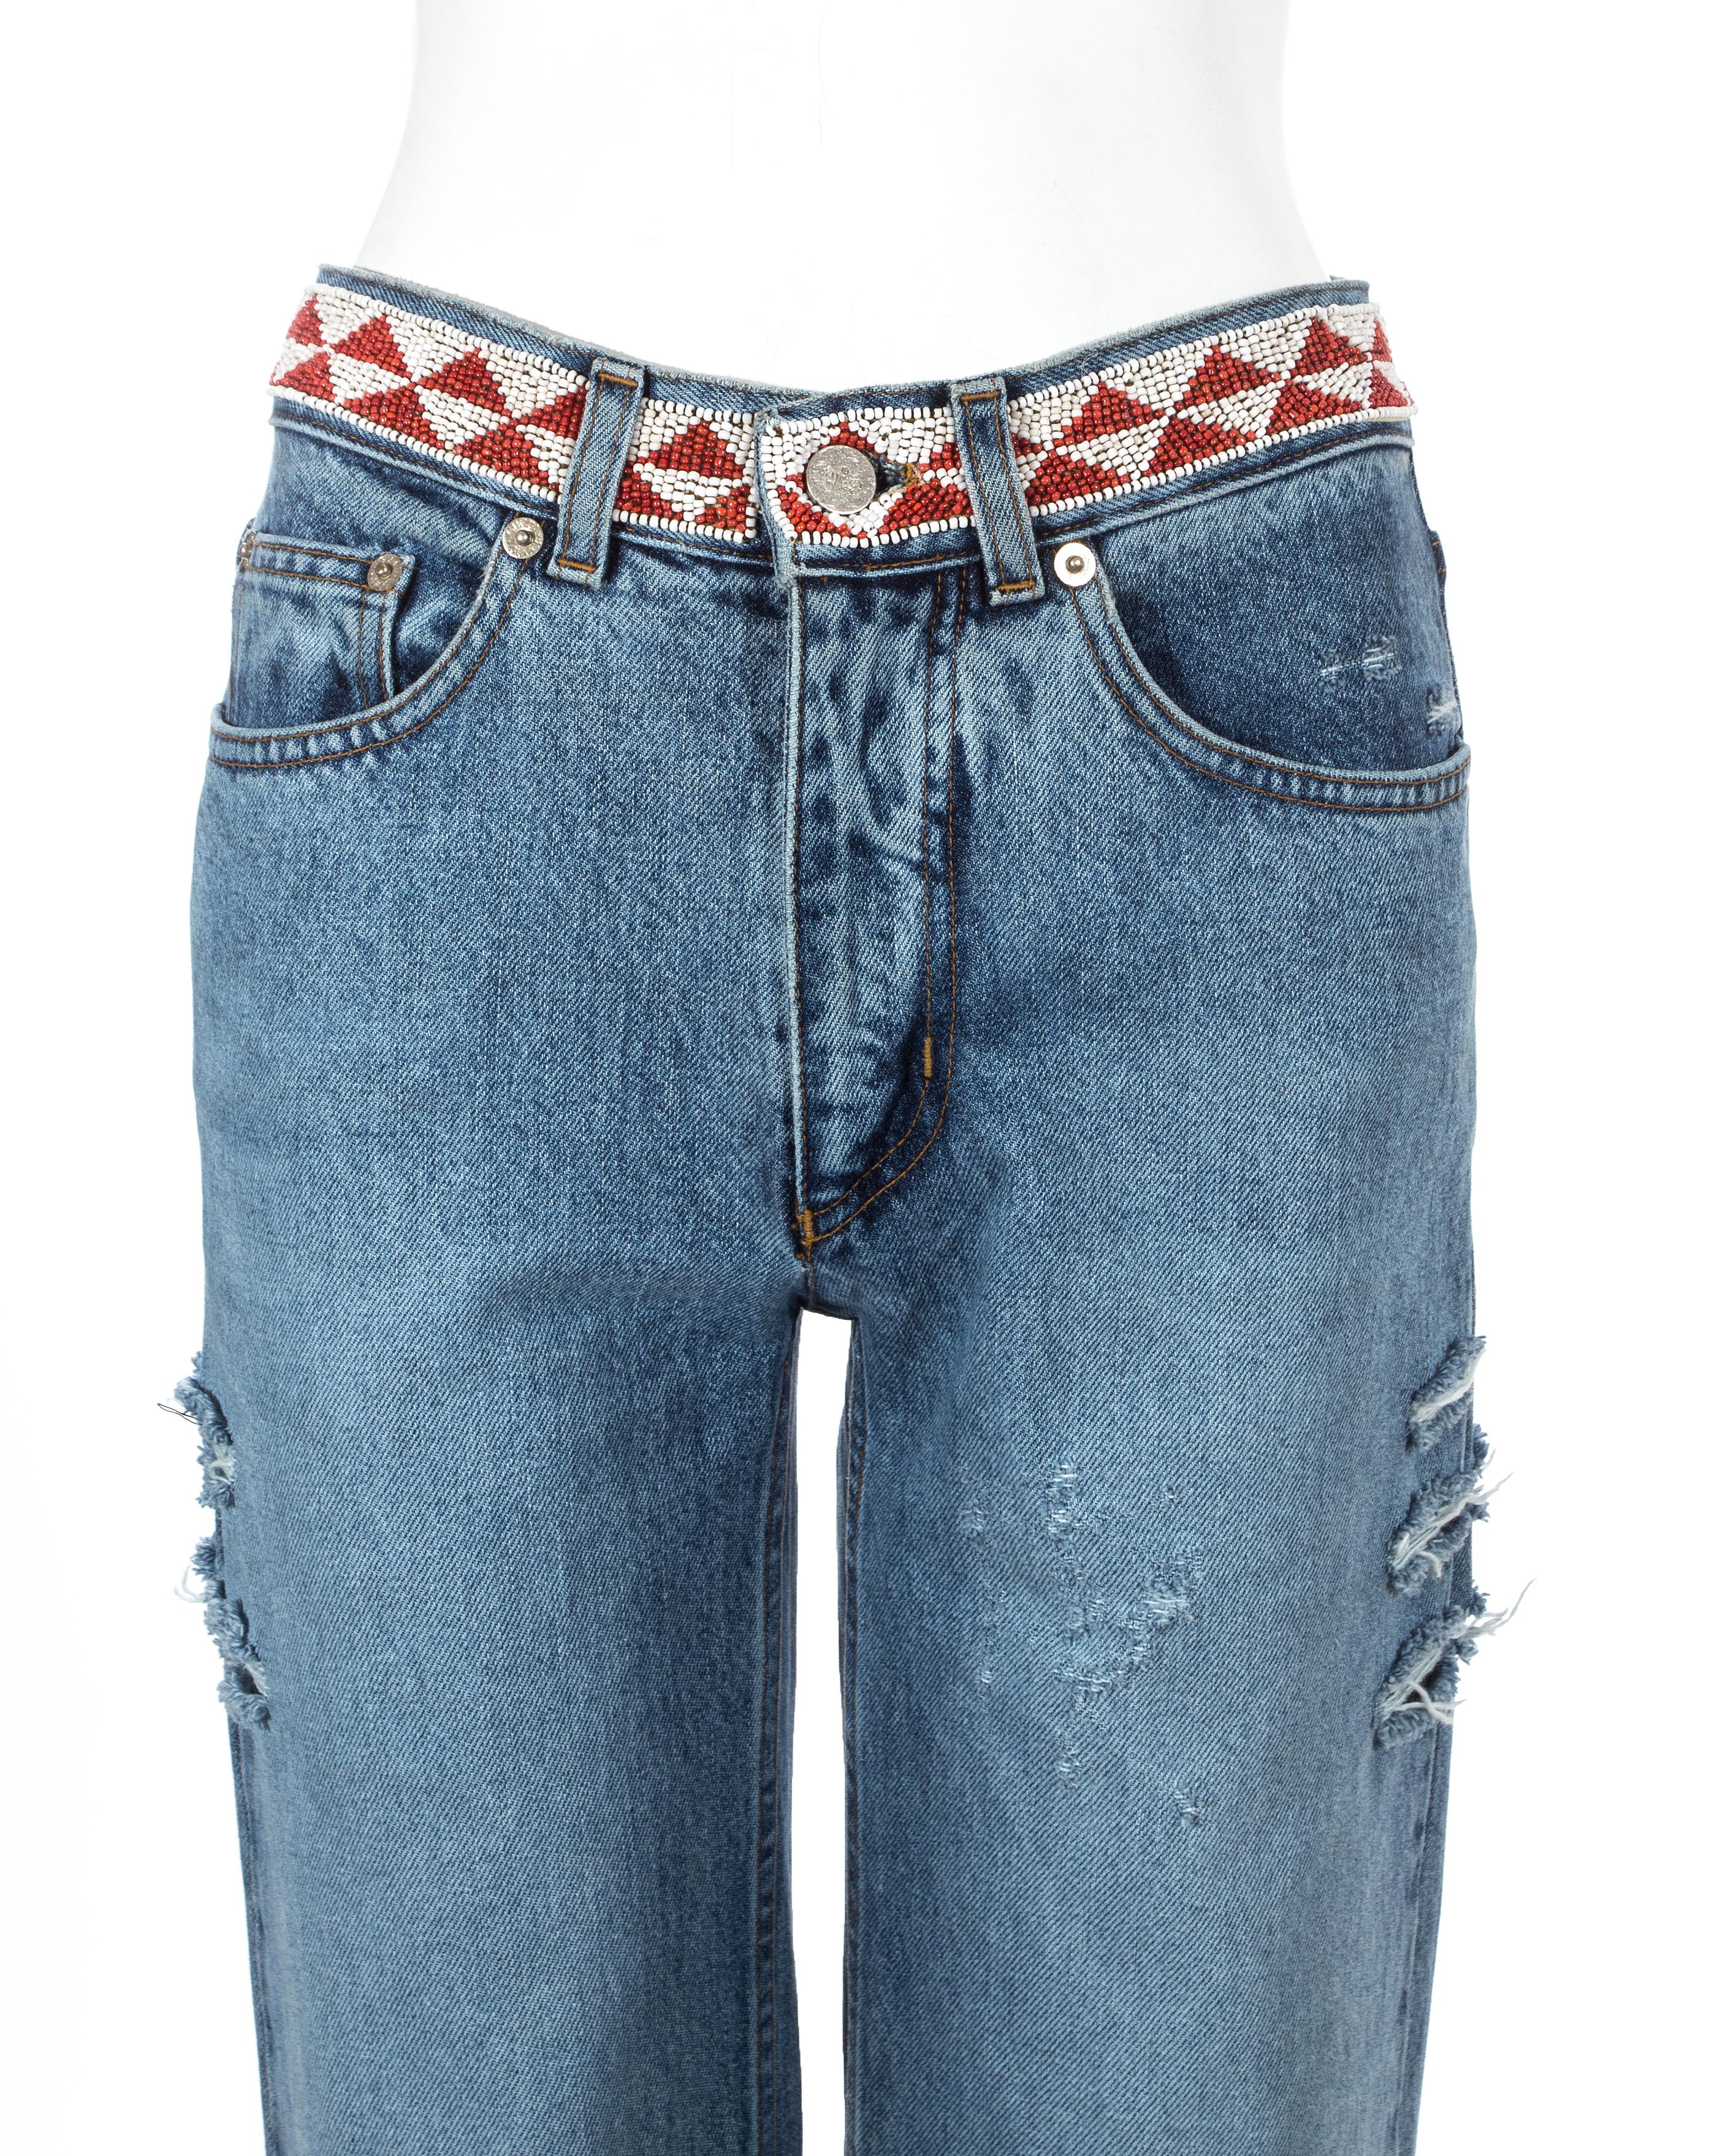 gucci tom ford jeans